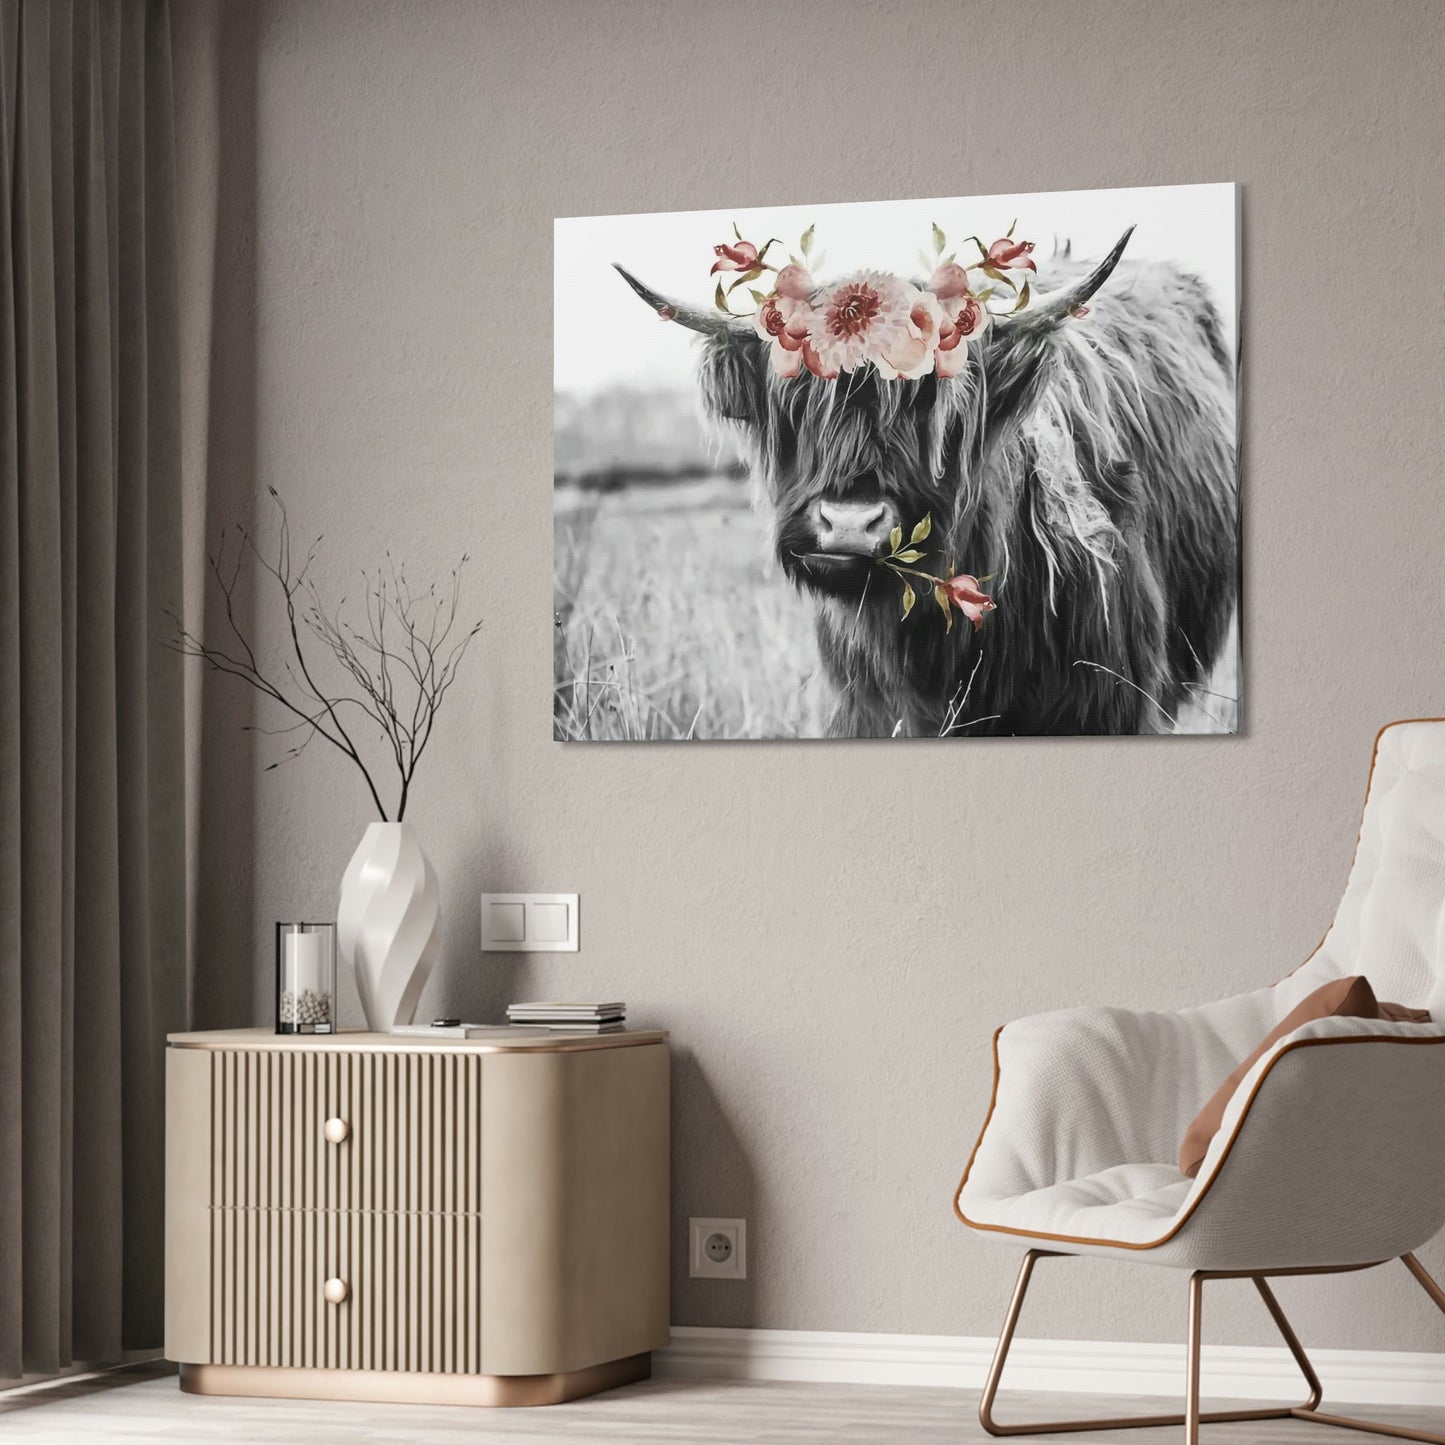 Highland Cow | Black-White Picture of Cow with Pink Flowers in the Mouth | Art Canvas — Pixoram